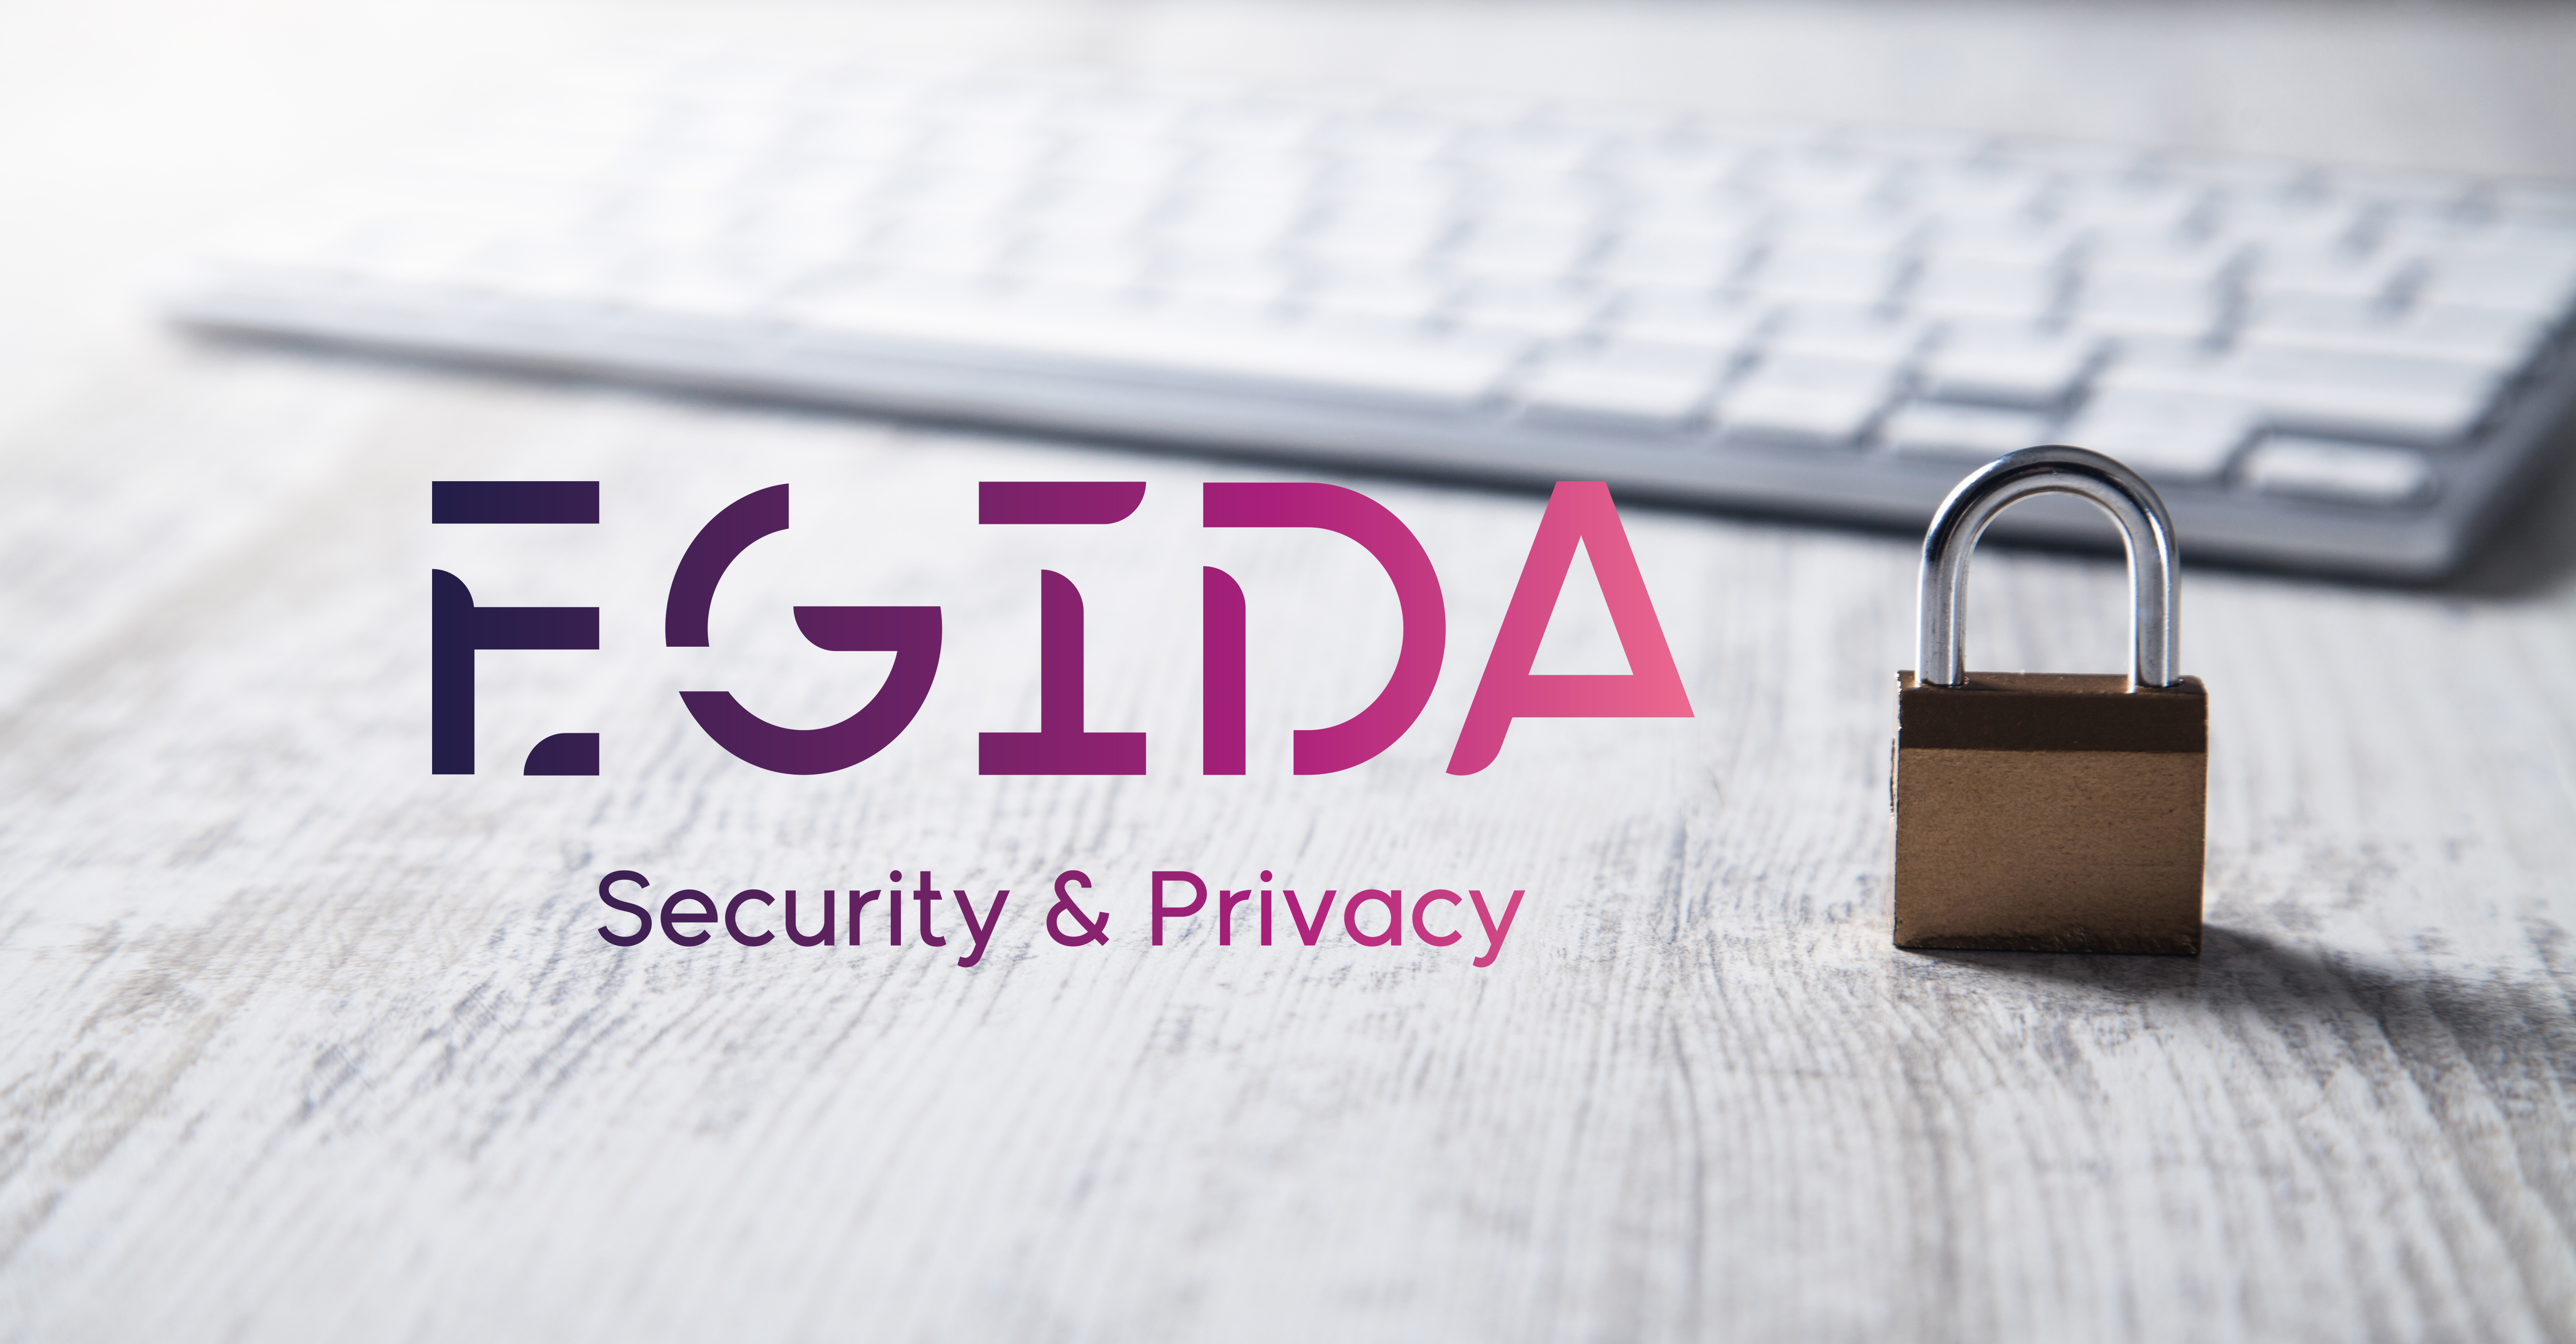 Vicomtech and Ikerlan participate in EGIDA, the only national network of excellence for privacy protection